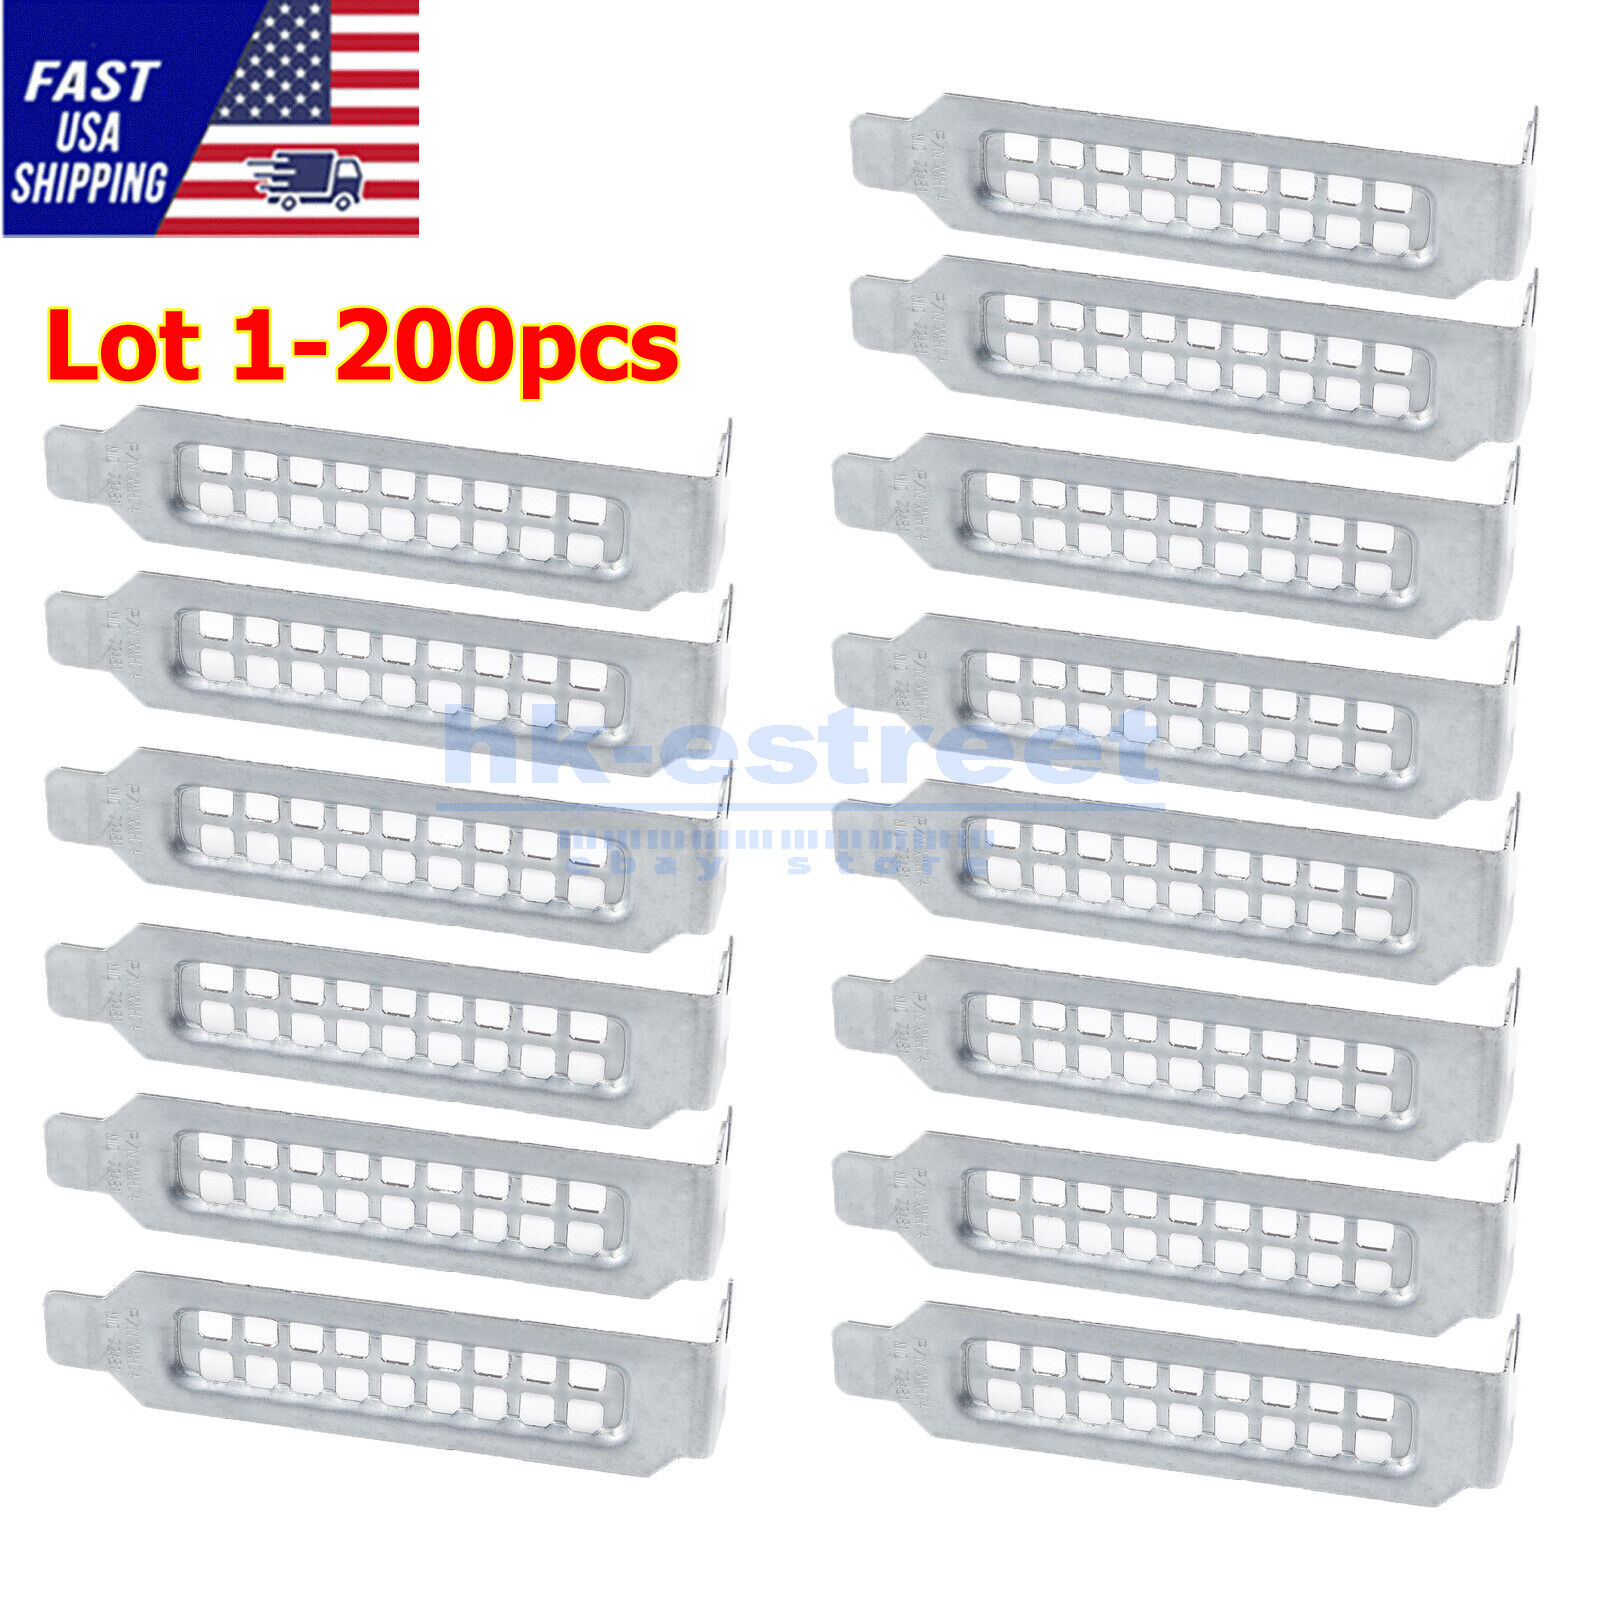 Lot 1-200 PCS for Dell XWH74 PCI 14G Low-Profile Blank Slot Cover R840 R740 R640